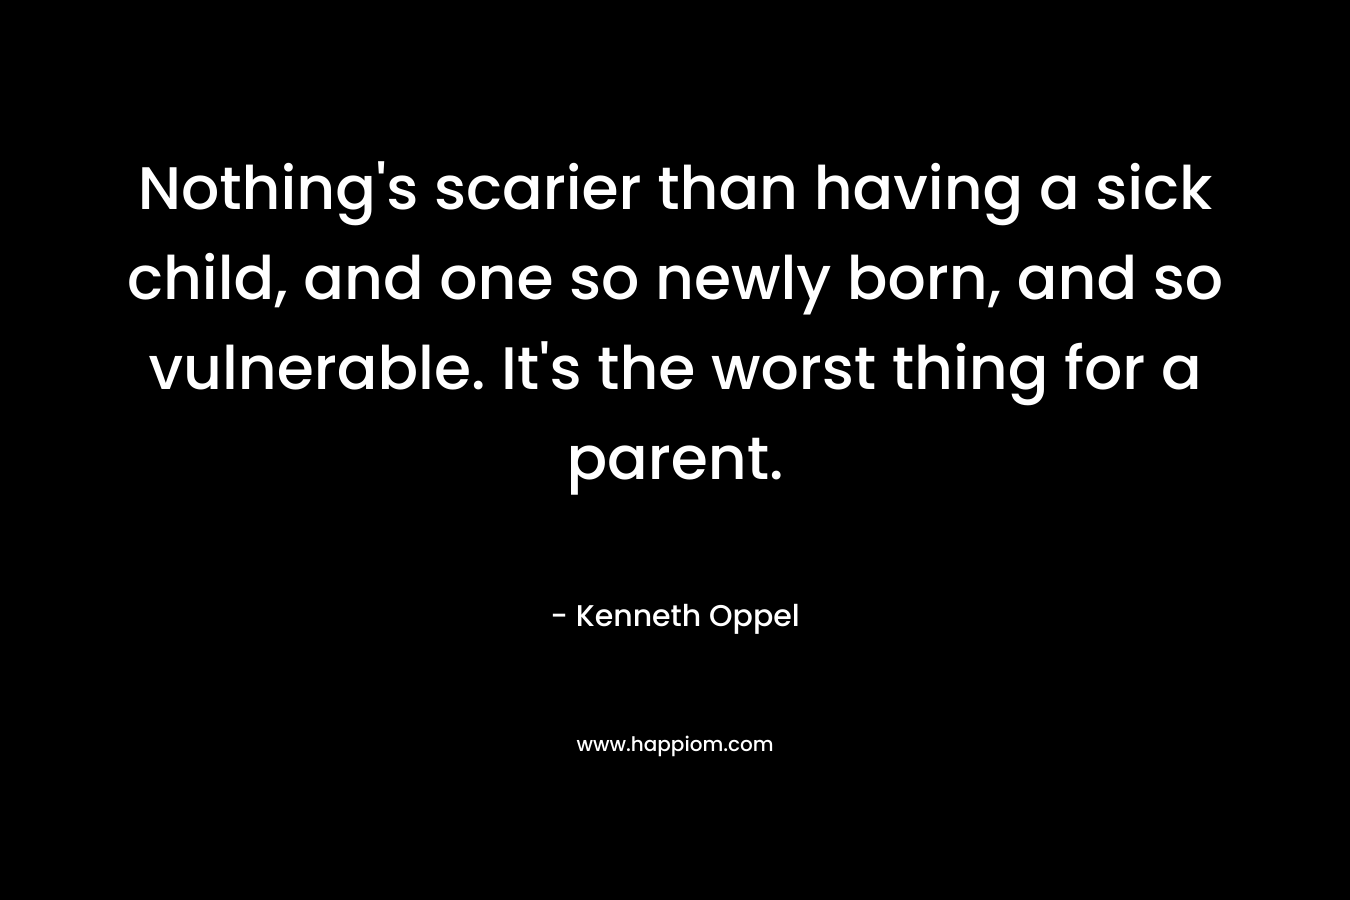 Nothing's scarier than having a sick child, and one so newly born, and so vulnerable. It's the worst thing for a parent.